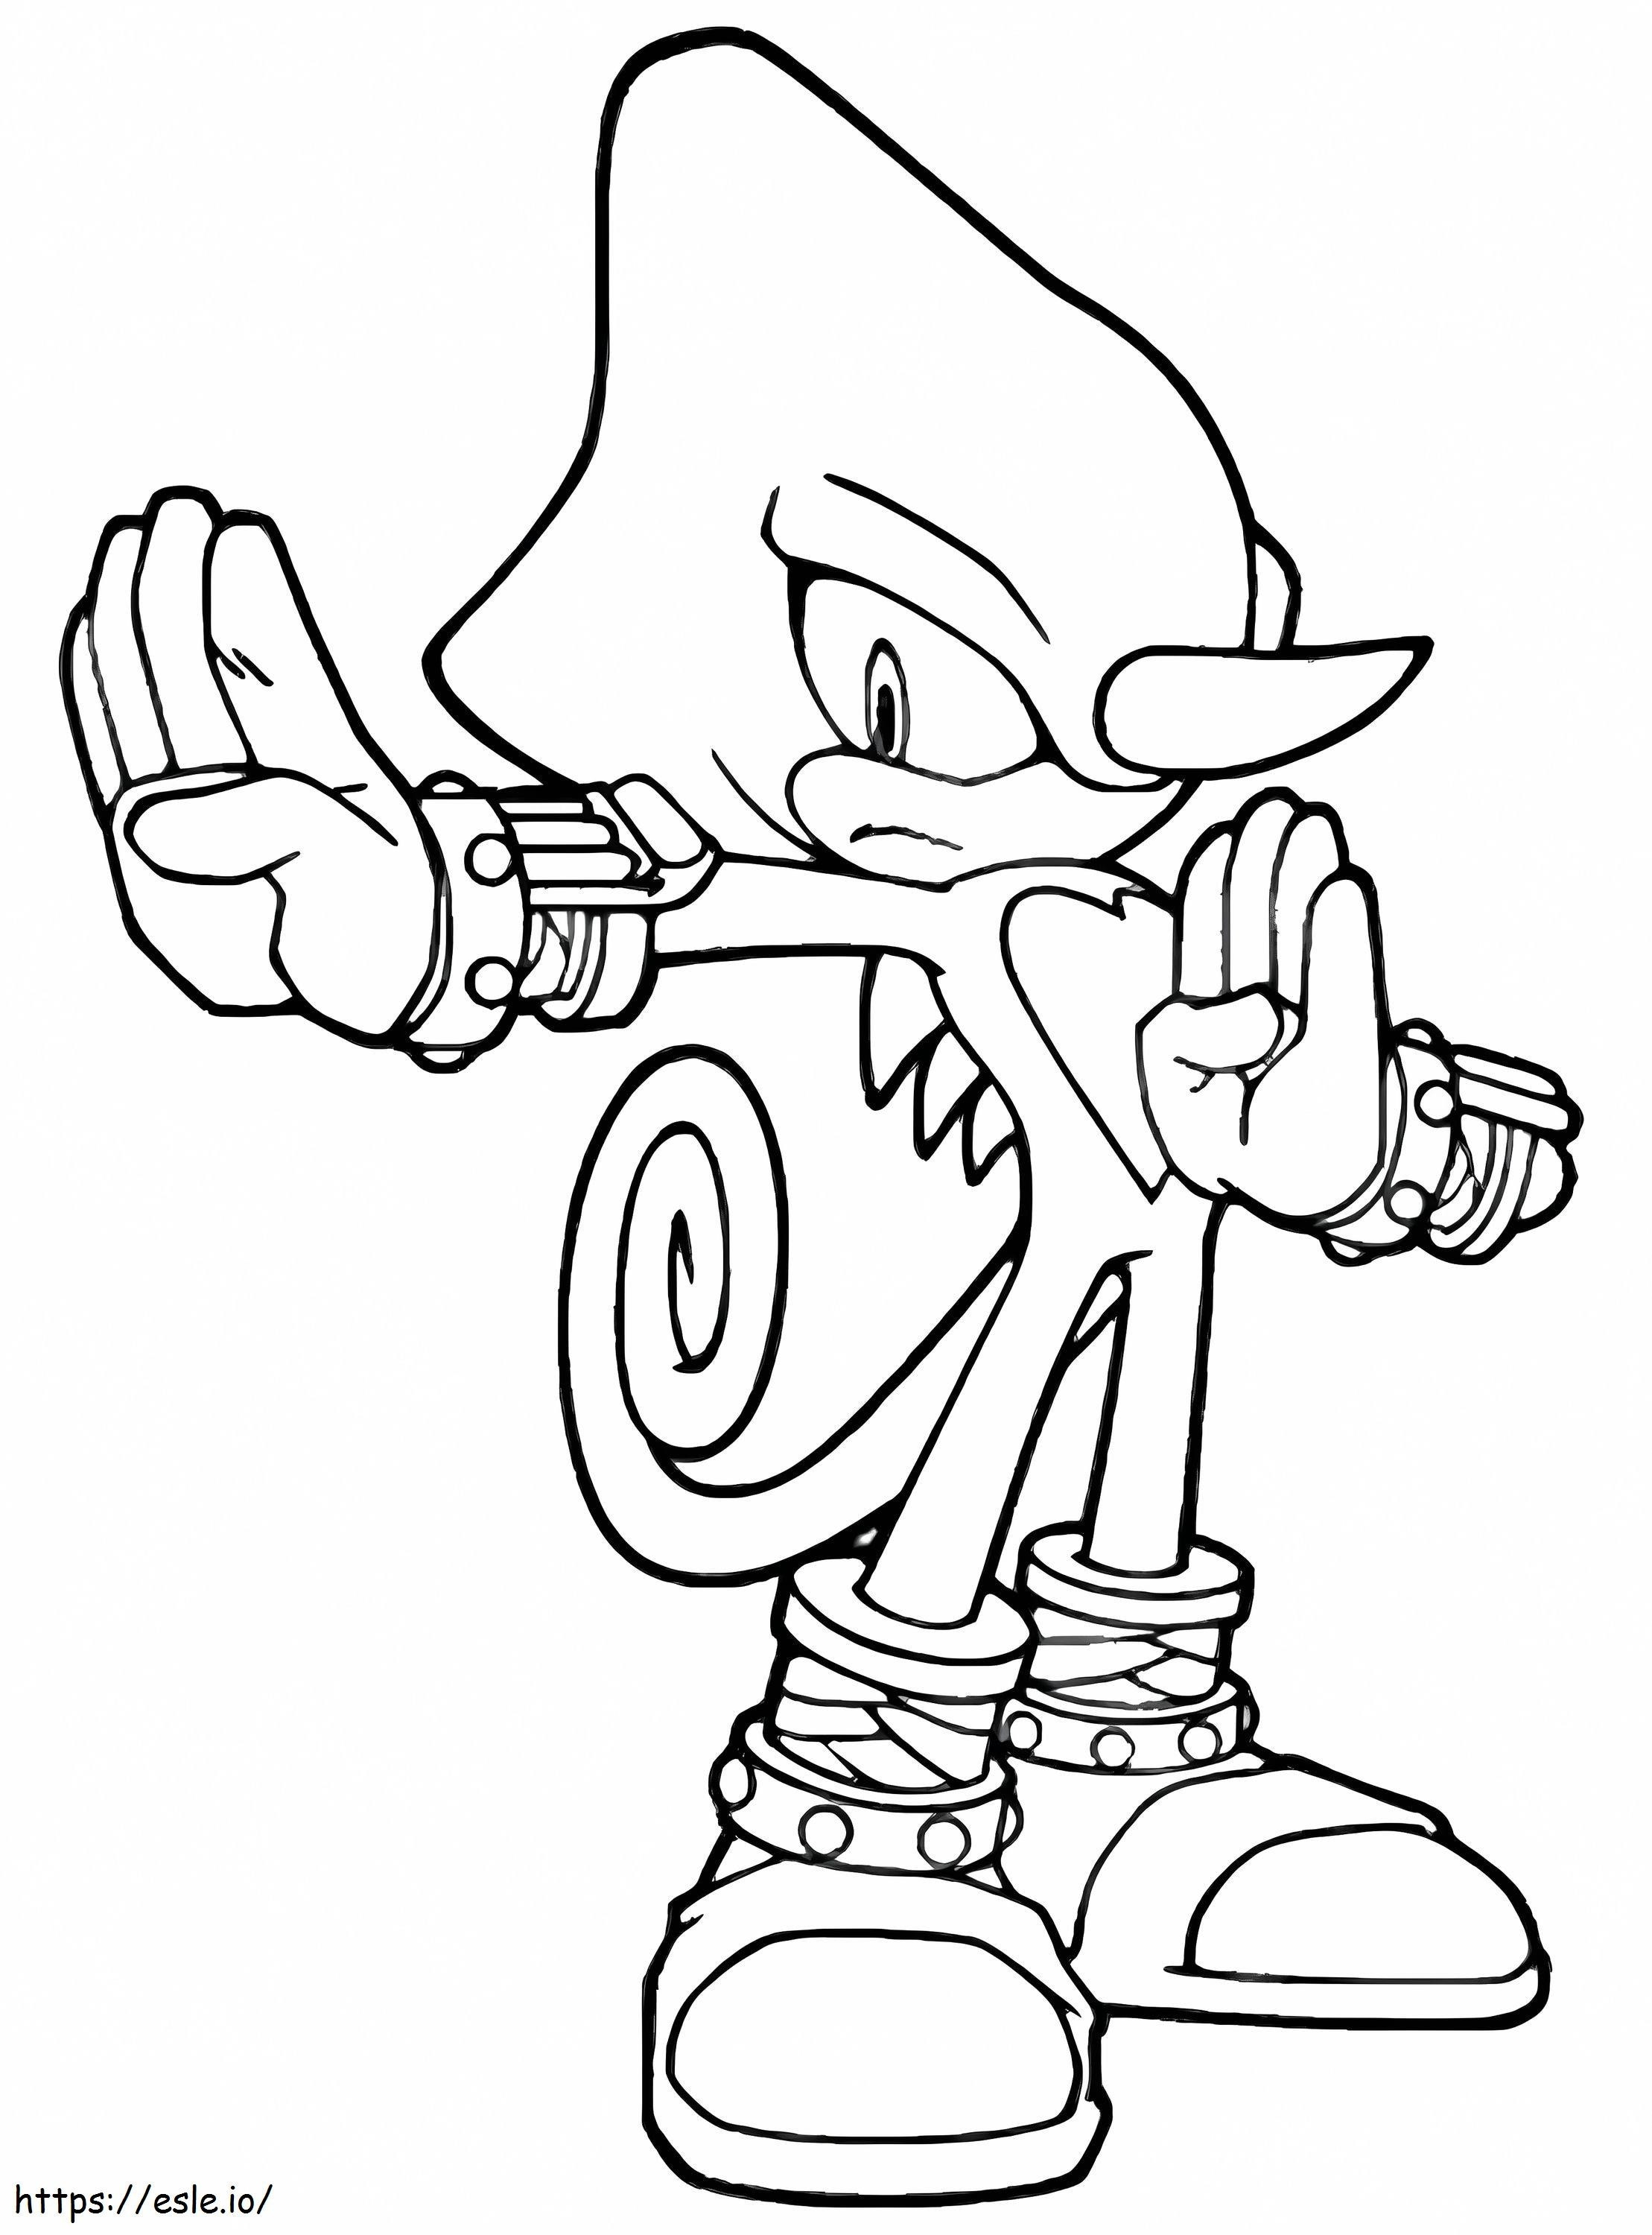 Spy coloring page